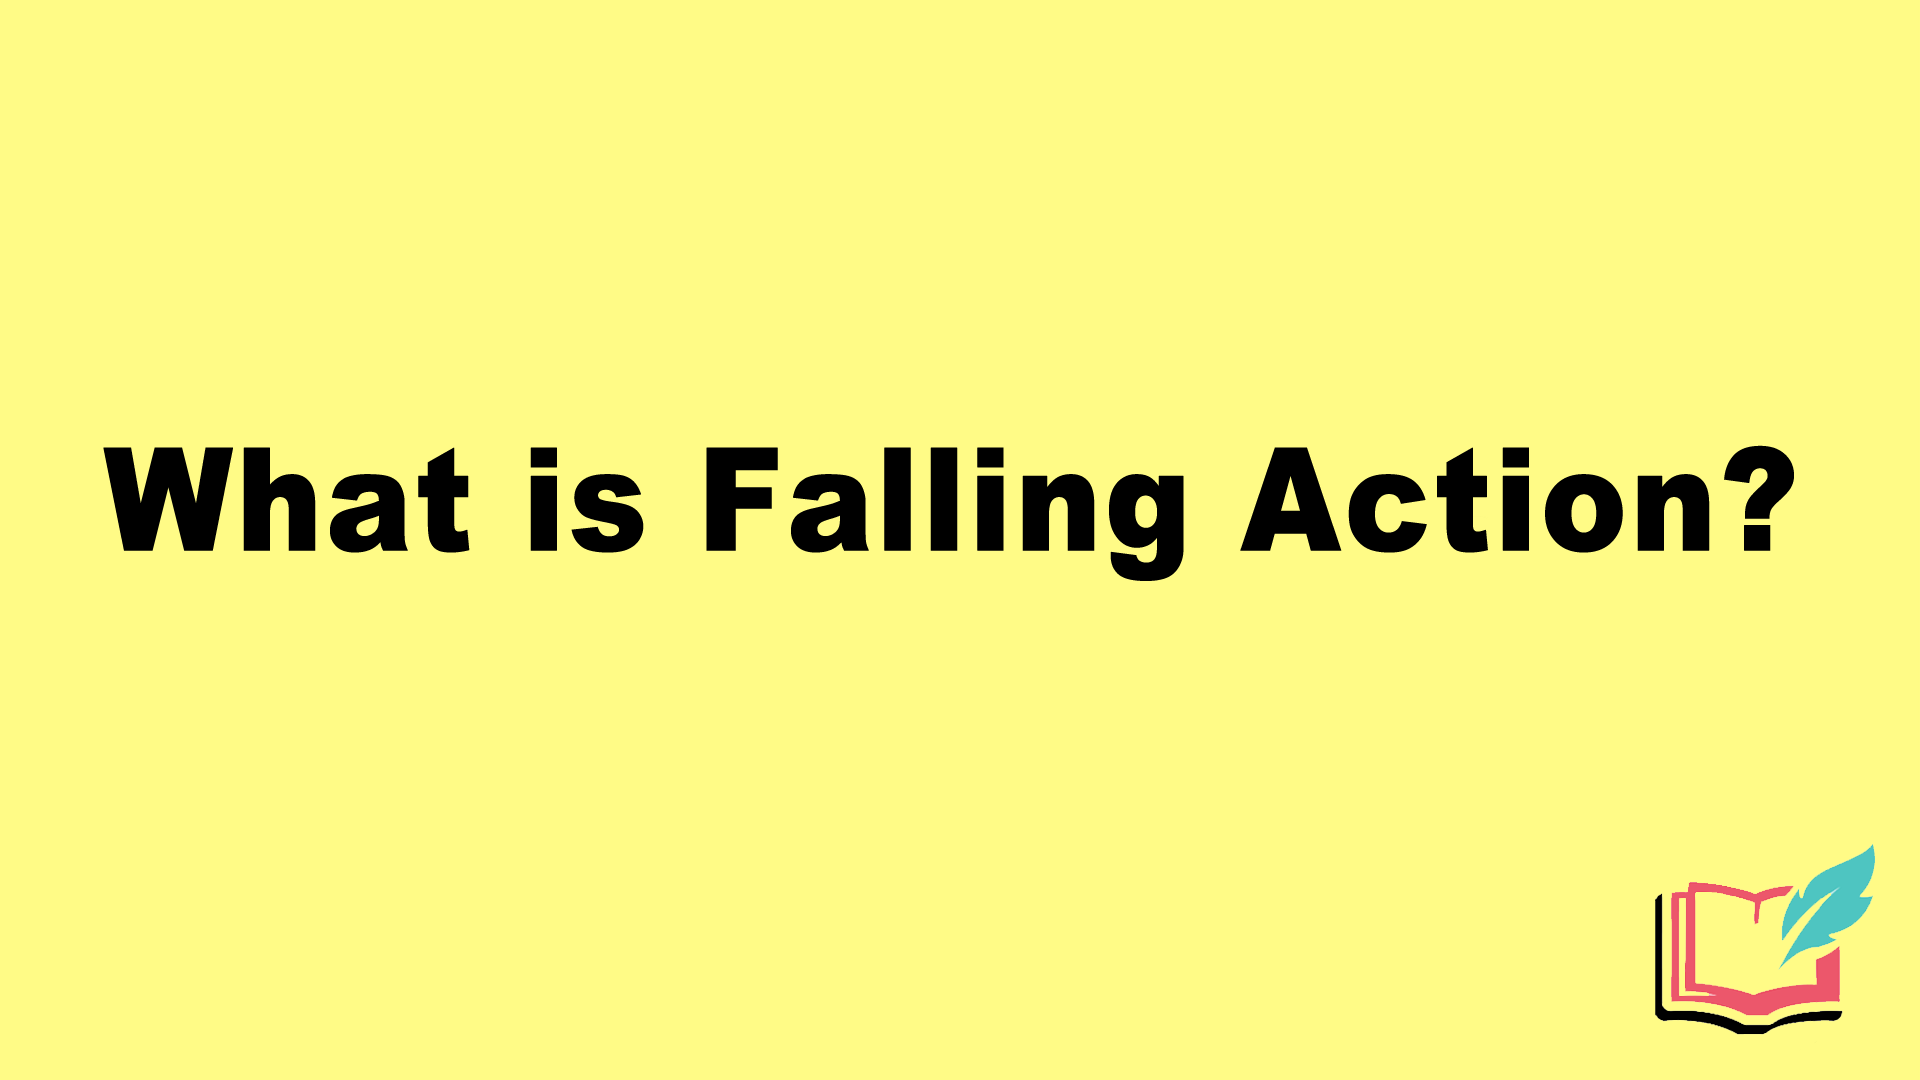 Falling Action: What it is & How to use it - The Art of Narrative